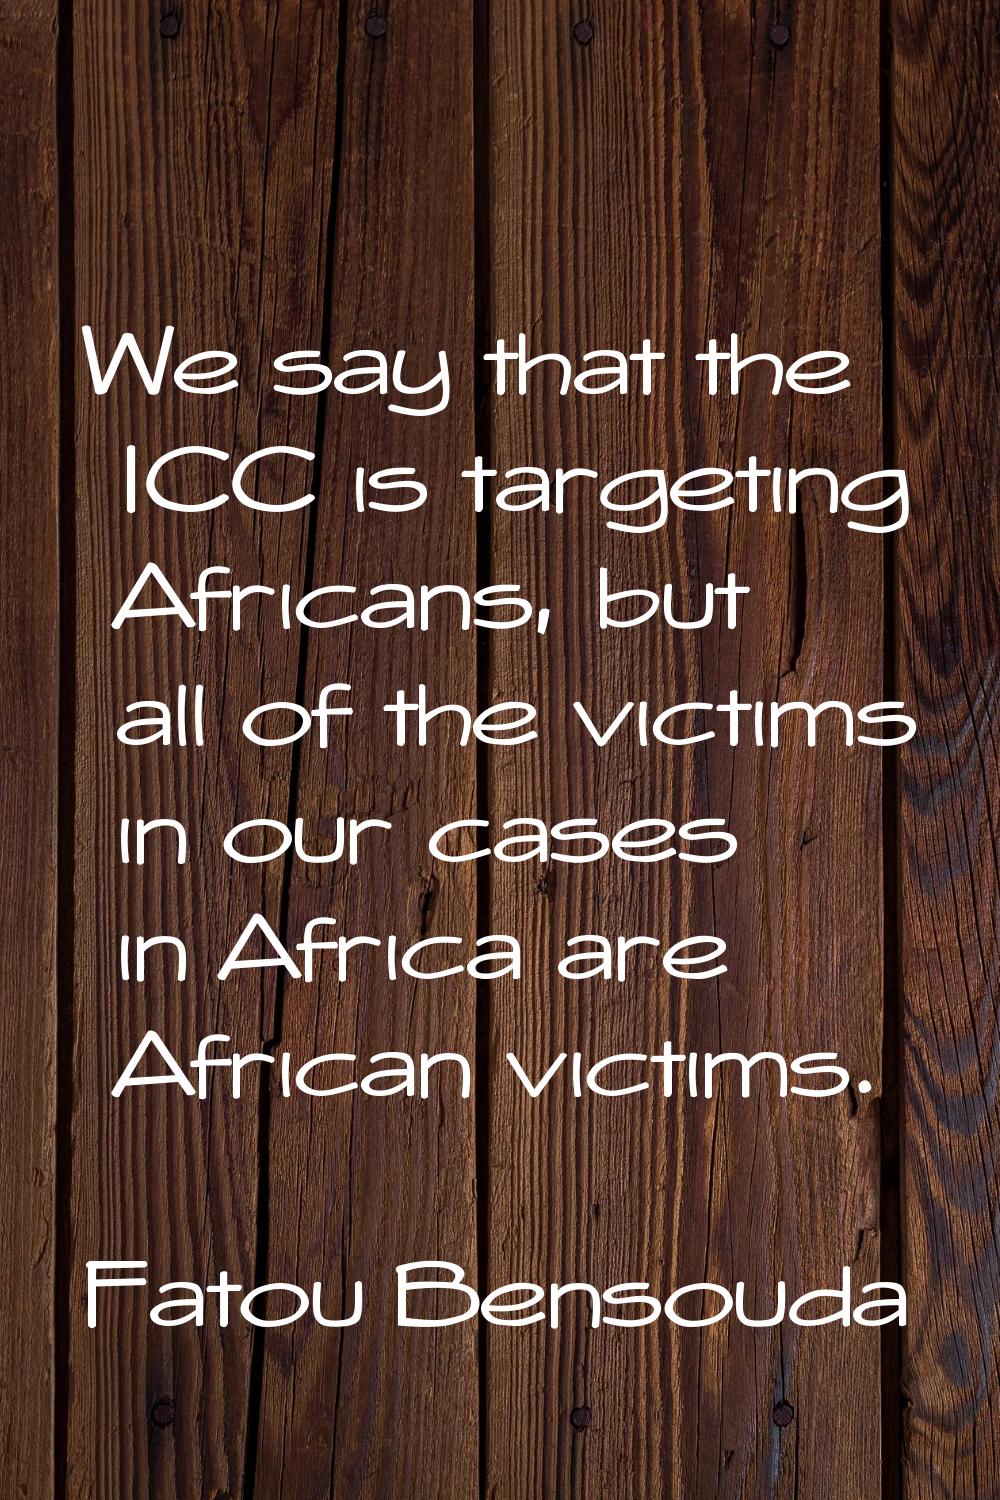 We say that the ICC is targeting Africans, but all of the victims in our cases in Africa are Africa